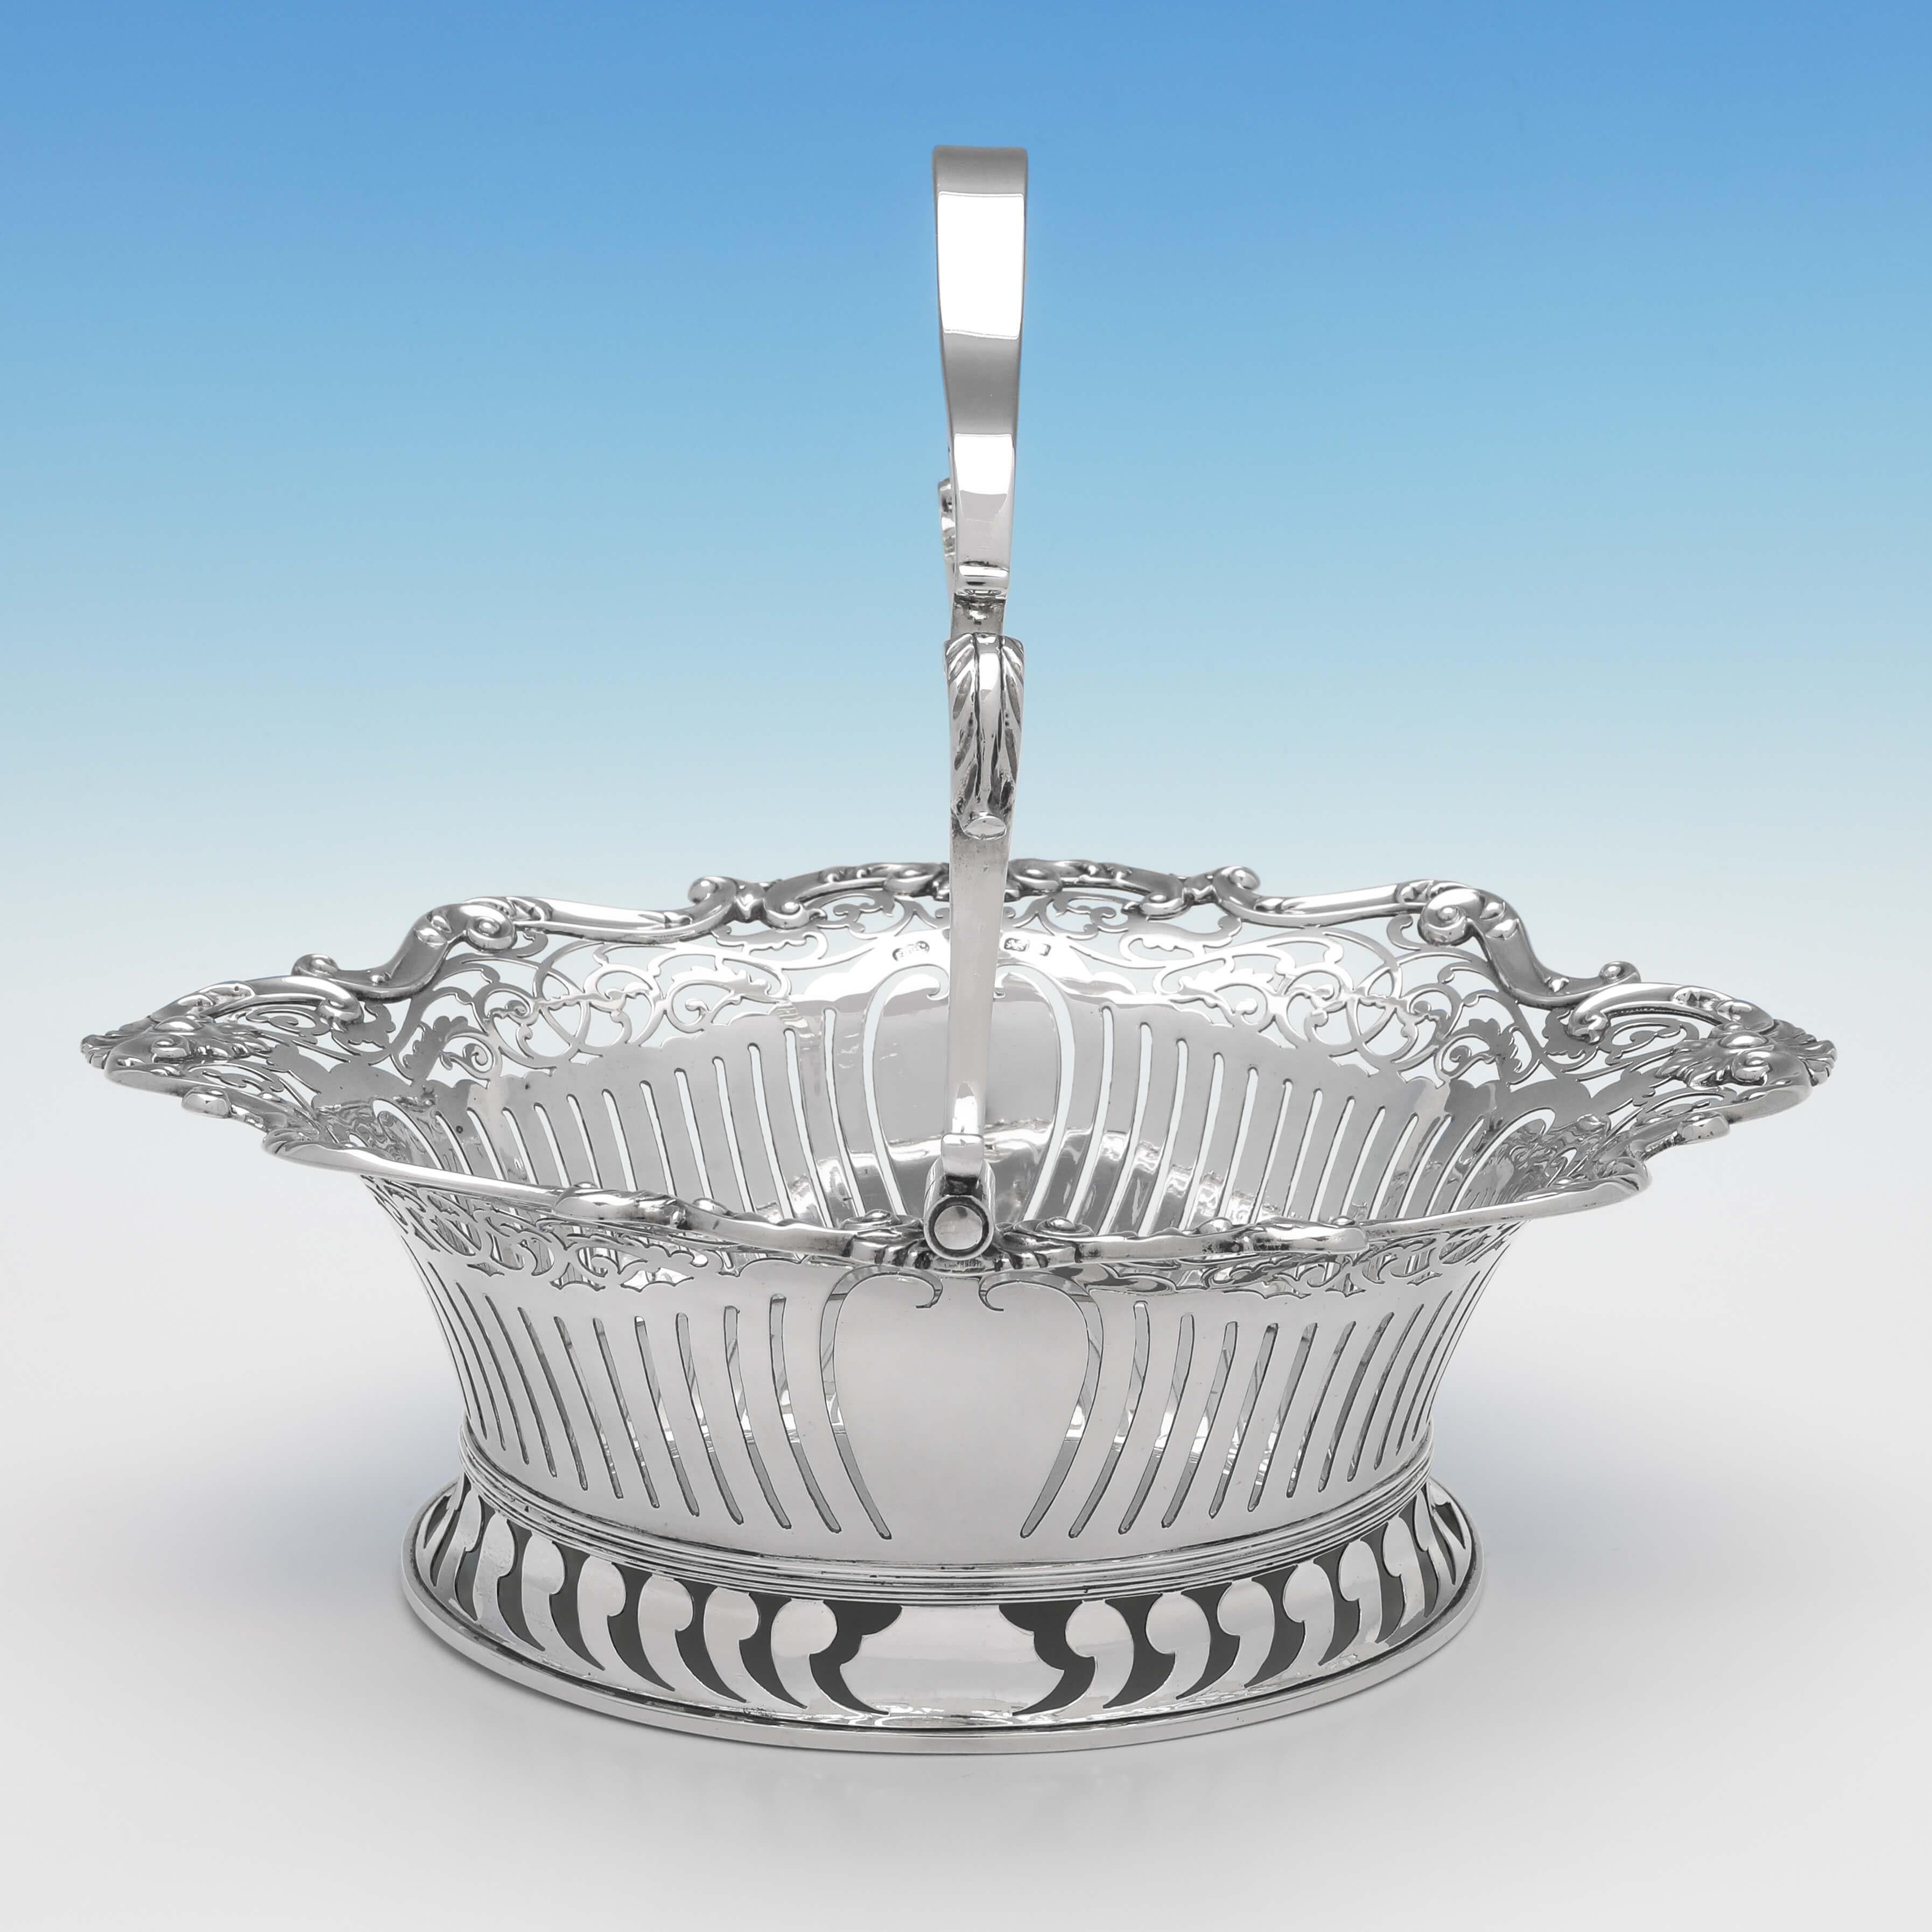 Hallmarked in Birmingham in 1903 by Elkington & Co., this delightful, antique sterling silver basket, features pierced decoration to the body and foot, an applied shell and scroll border, and an acanthus detailed swing handle. The basket measures